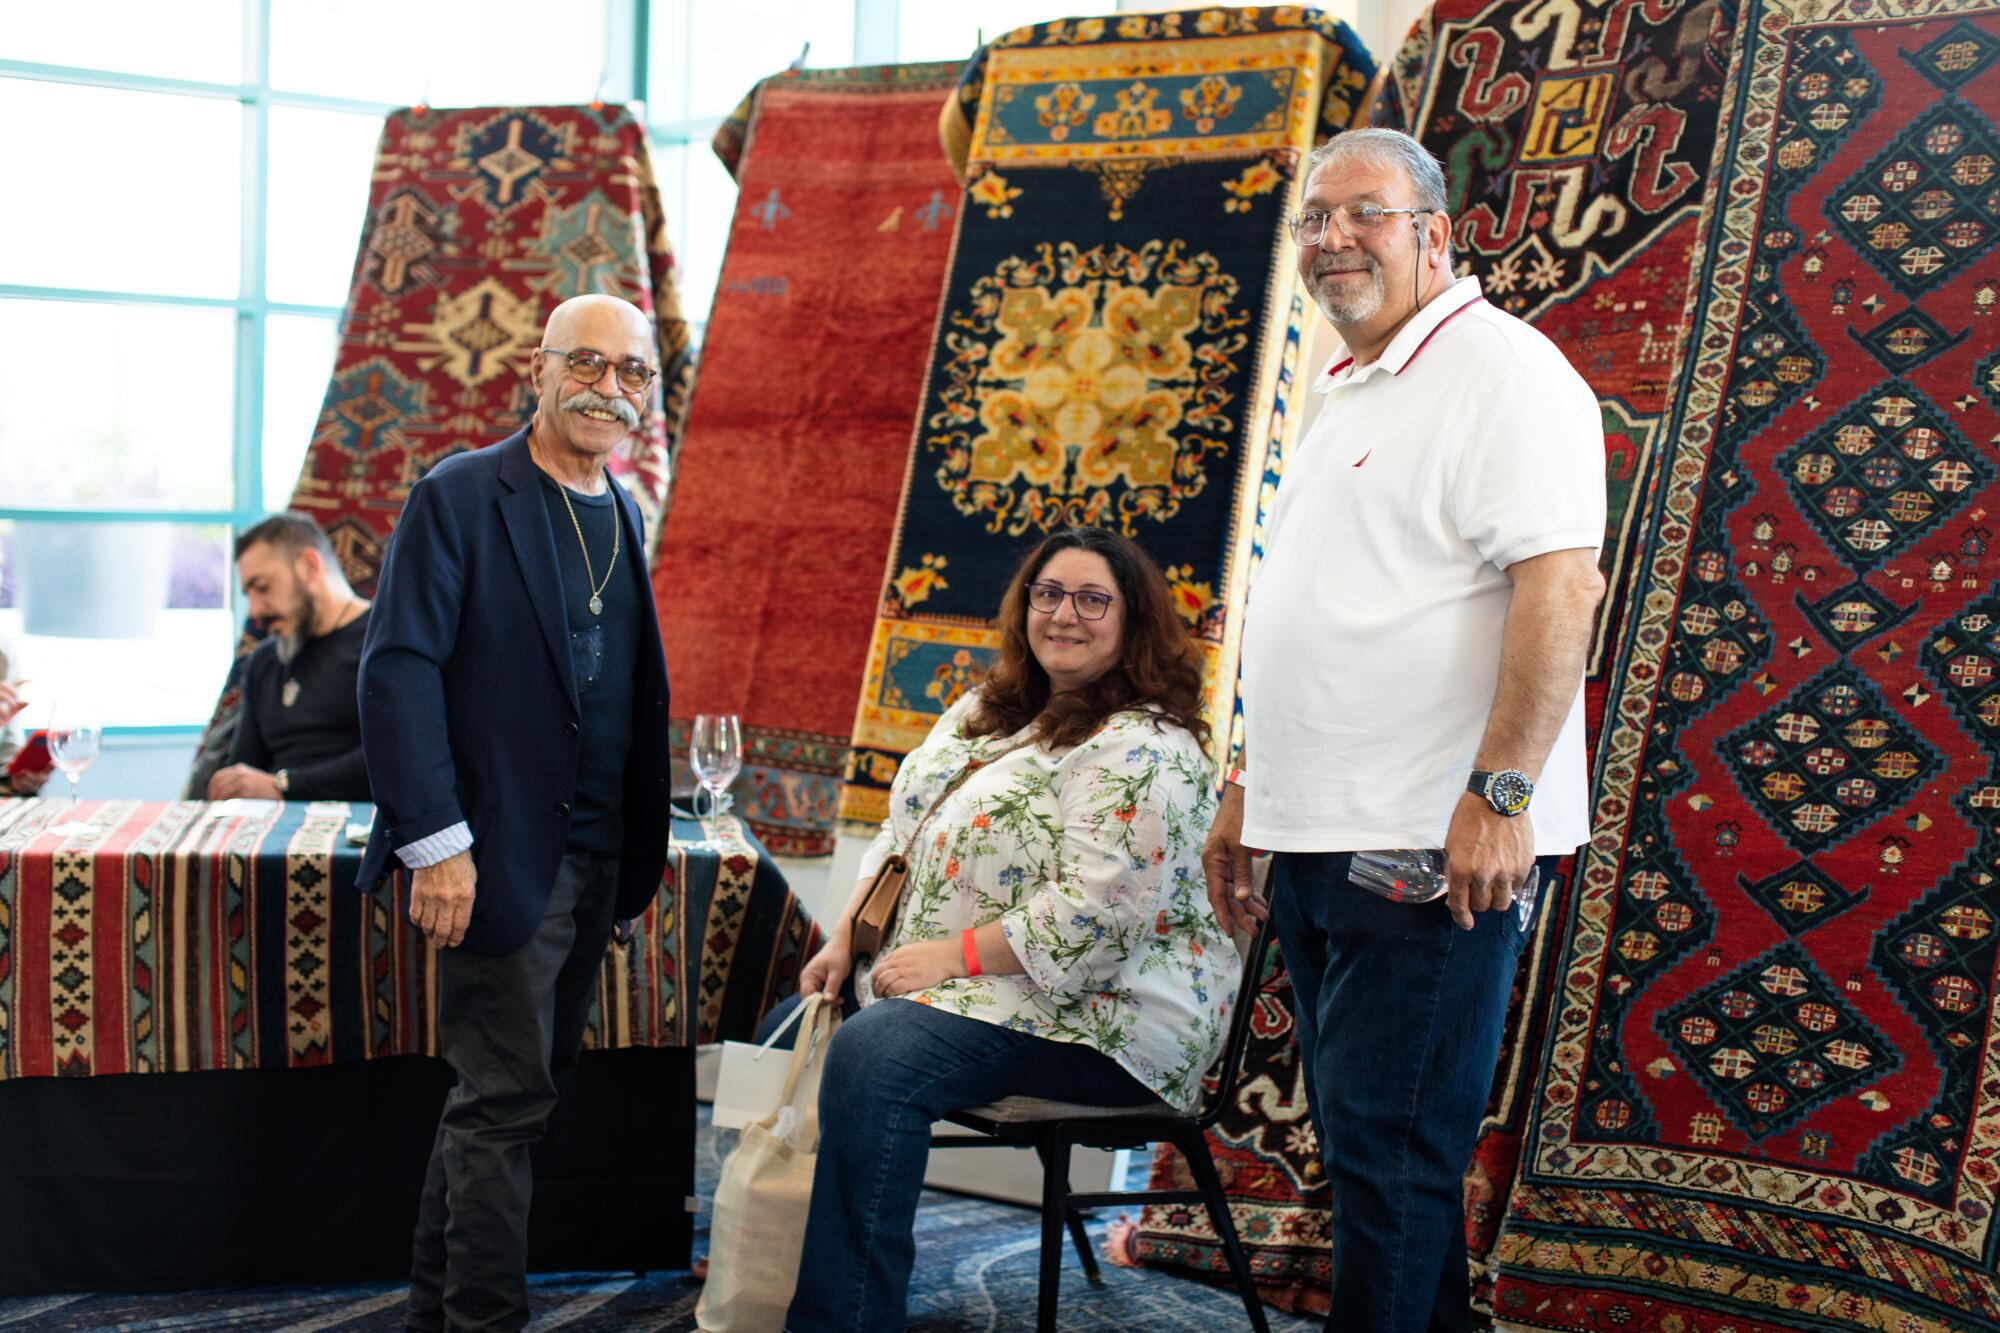 Two men and a woman in front of a display of handcrafted rugs.